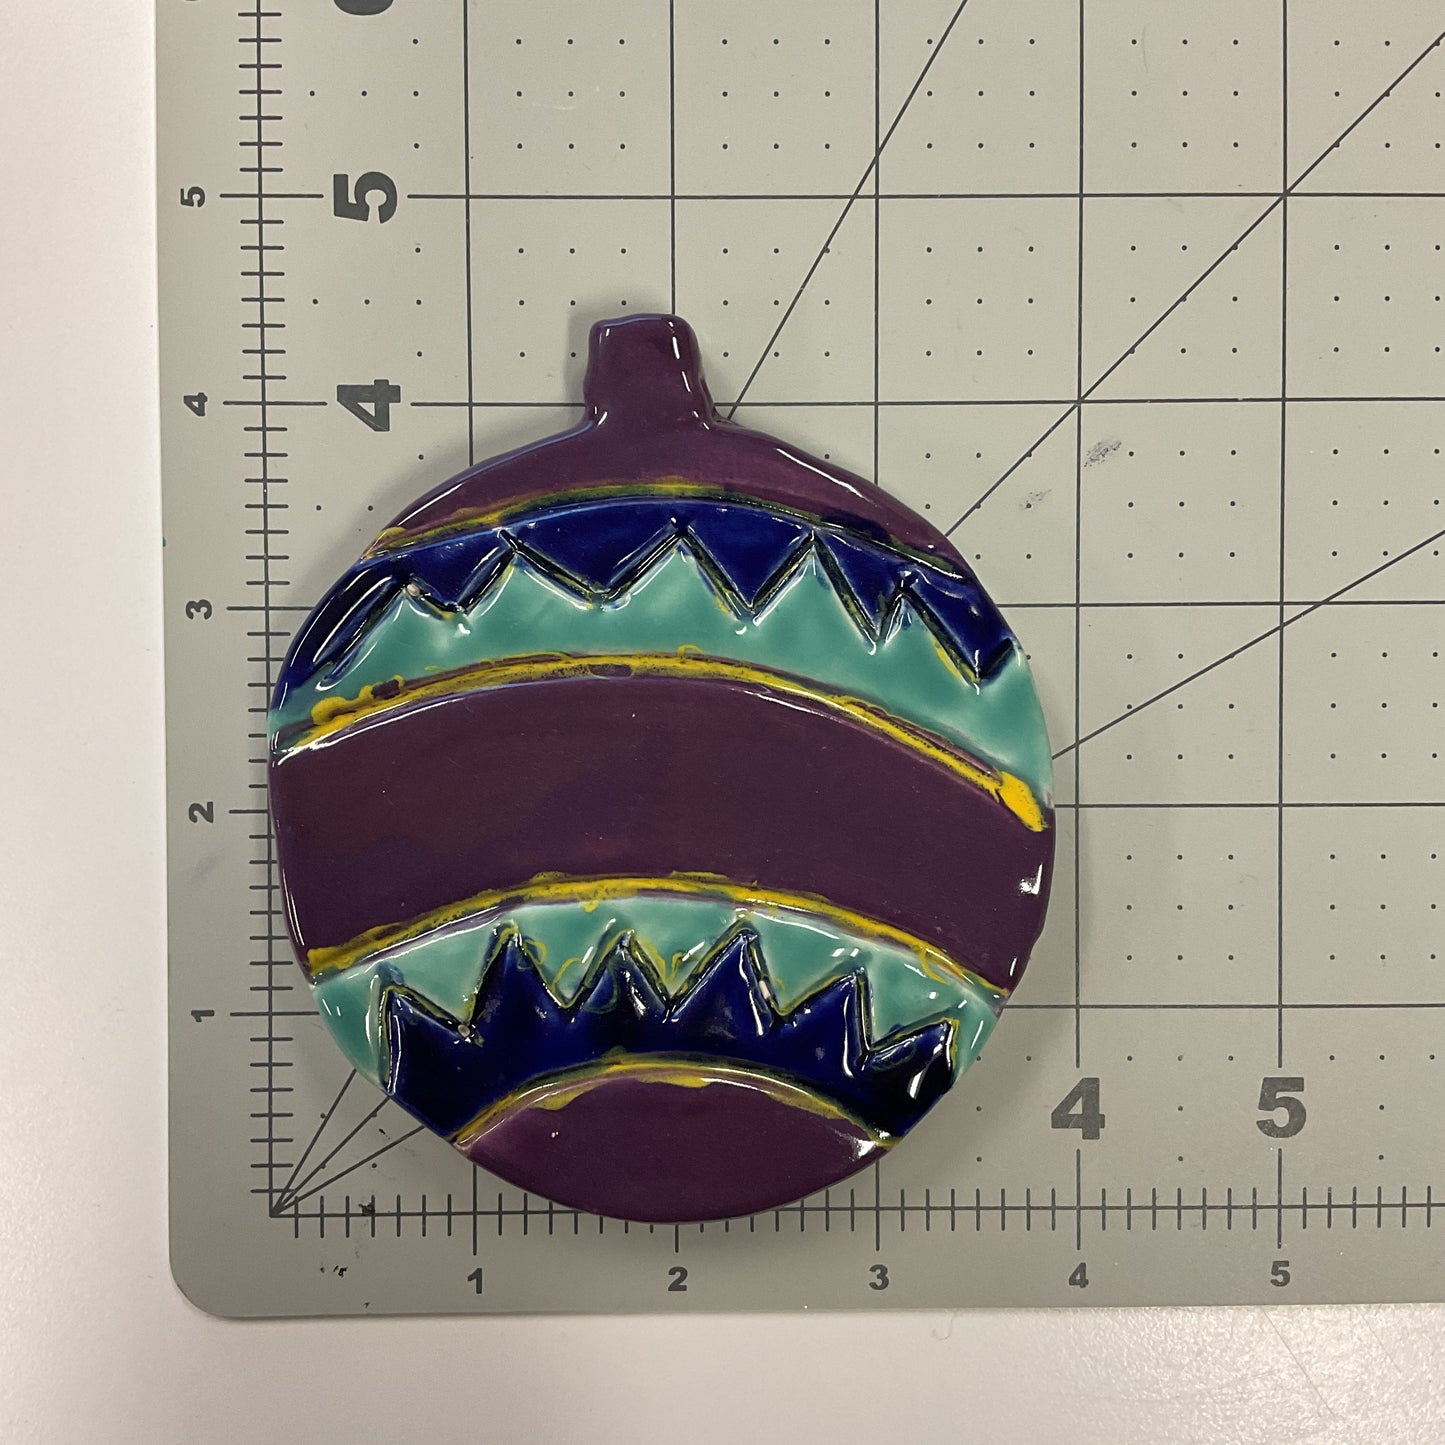 Ceramic Arts Handmade Clay Crafts 4.5-inch x 4-inch Glazed Christmas Ball Ornament by Anonymous